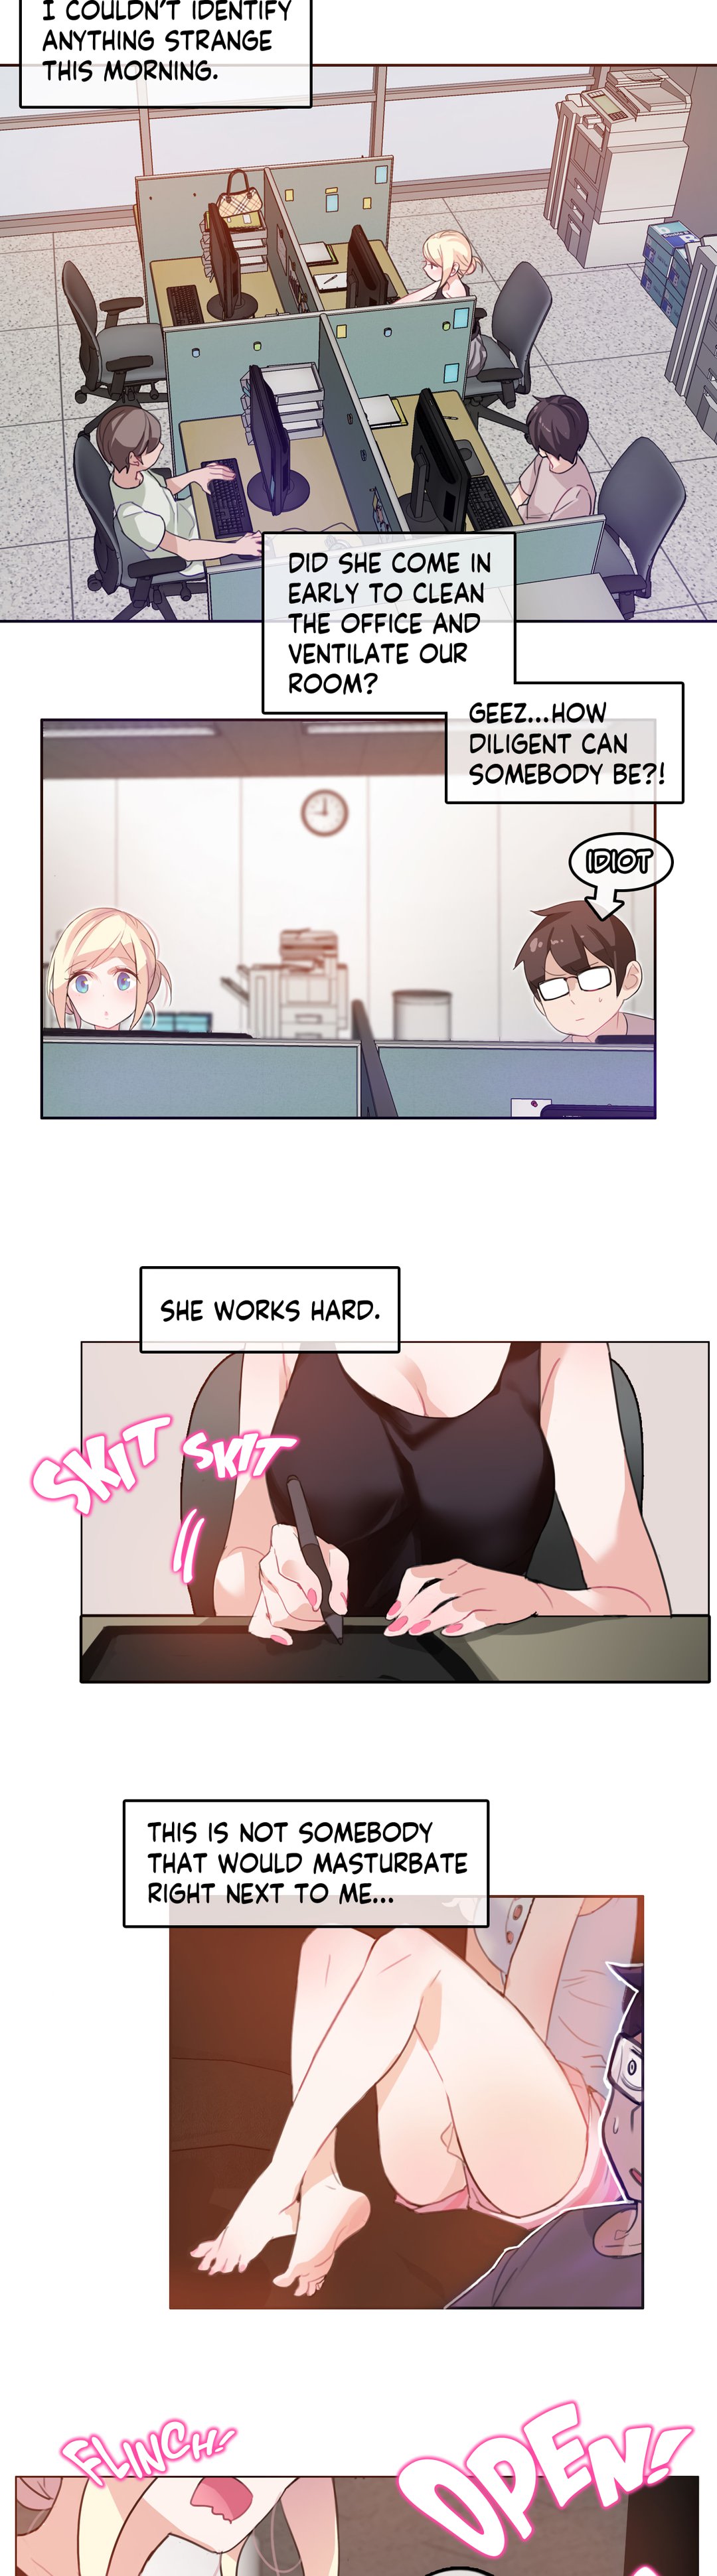 A Pervert's Daily Life - 5 page 8